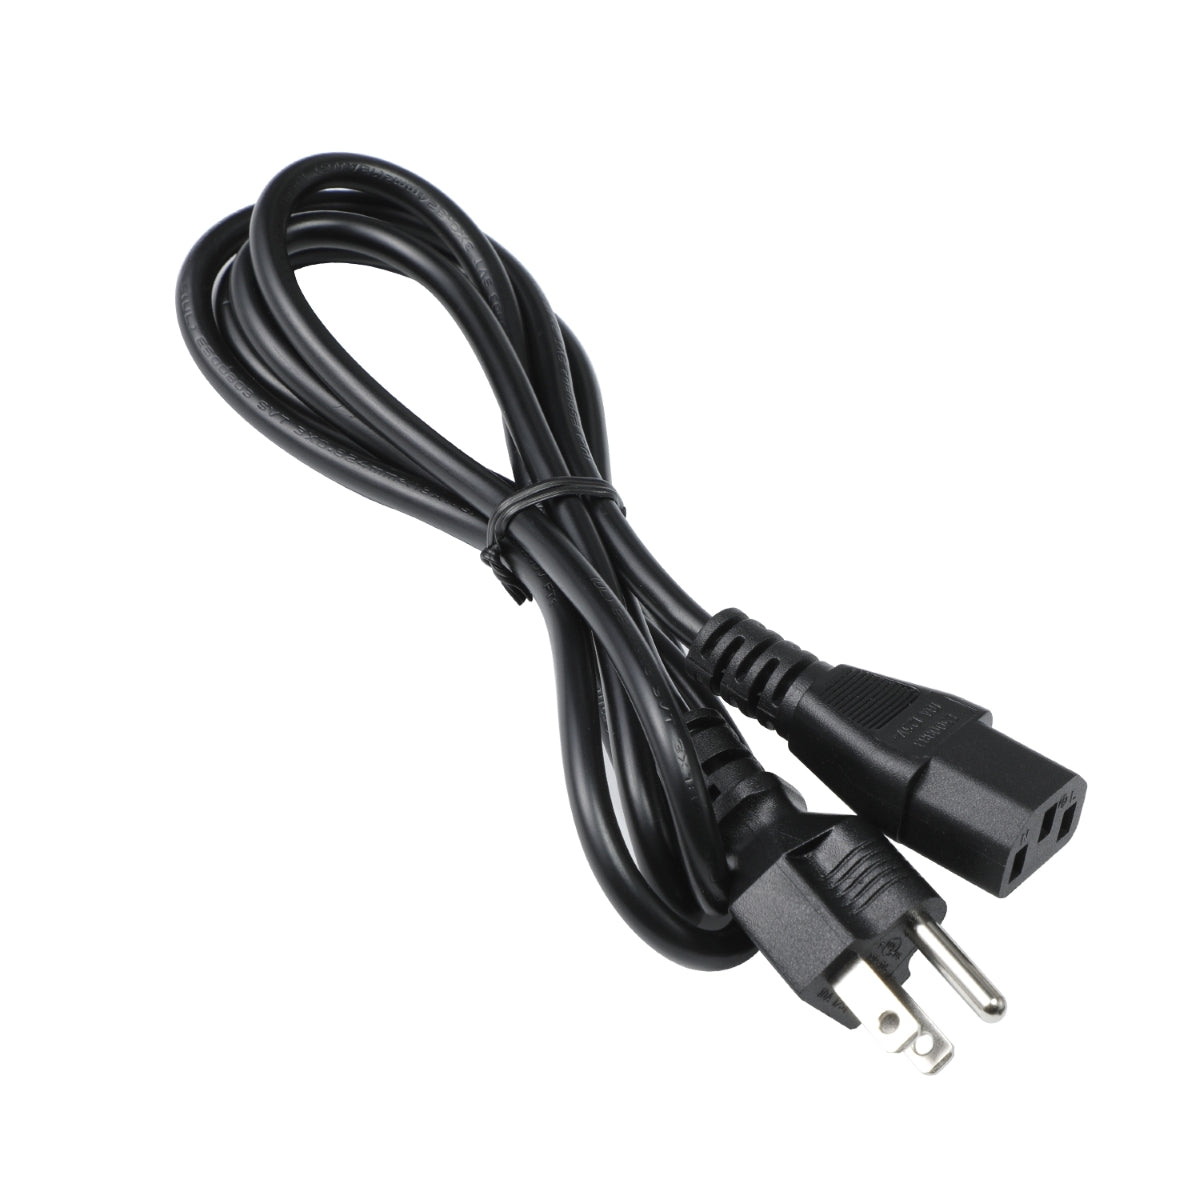 Power Cord for BenQ ZOWIE RL2460S e-Sports Monitor.